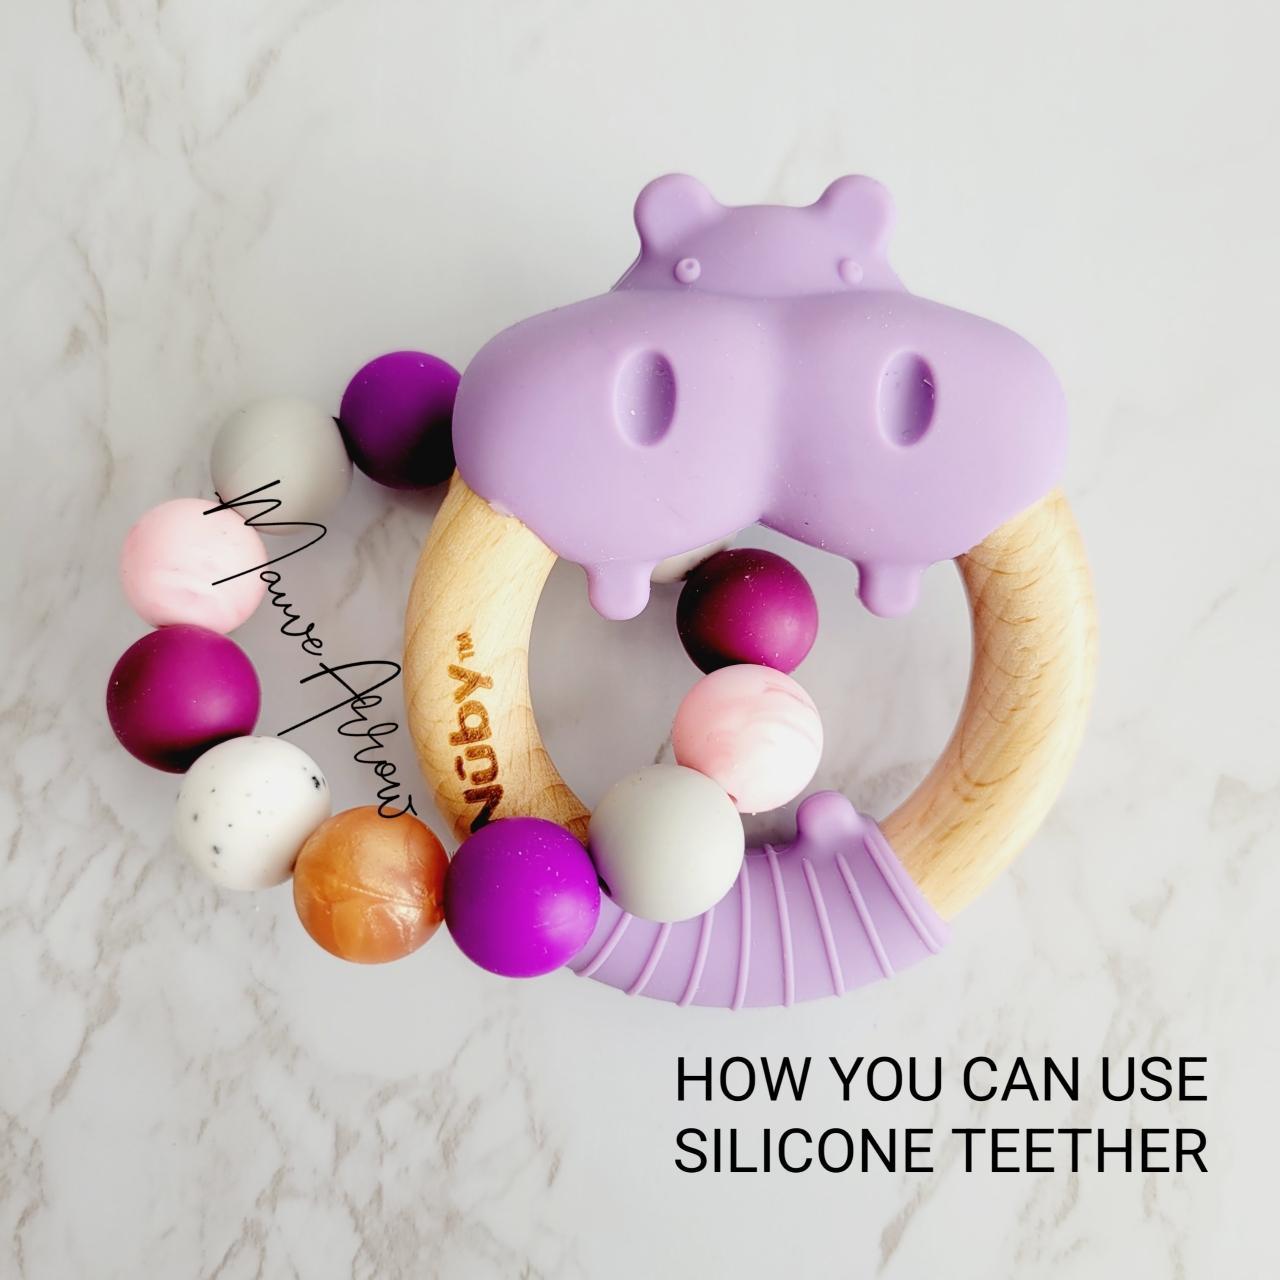 Purple Hippo Wood & Silicone Natural Teether - Sassy Bead Shoppe